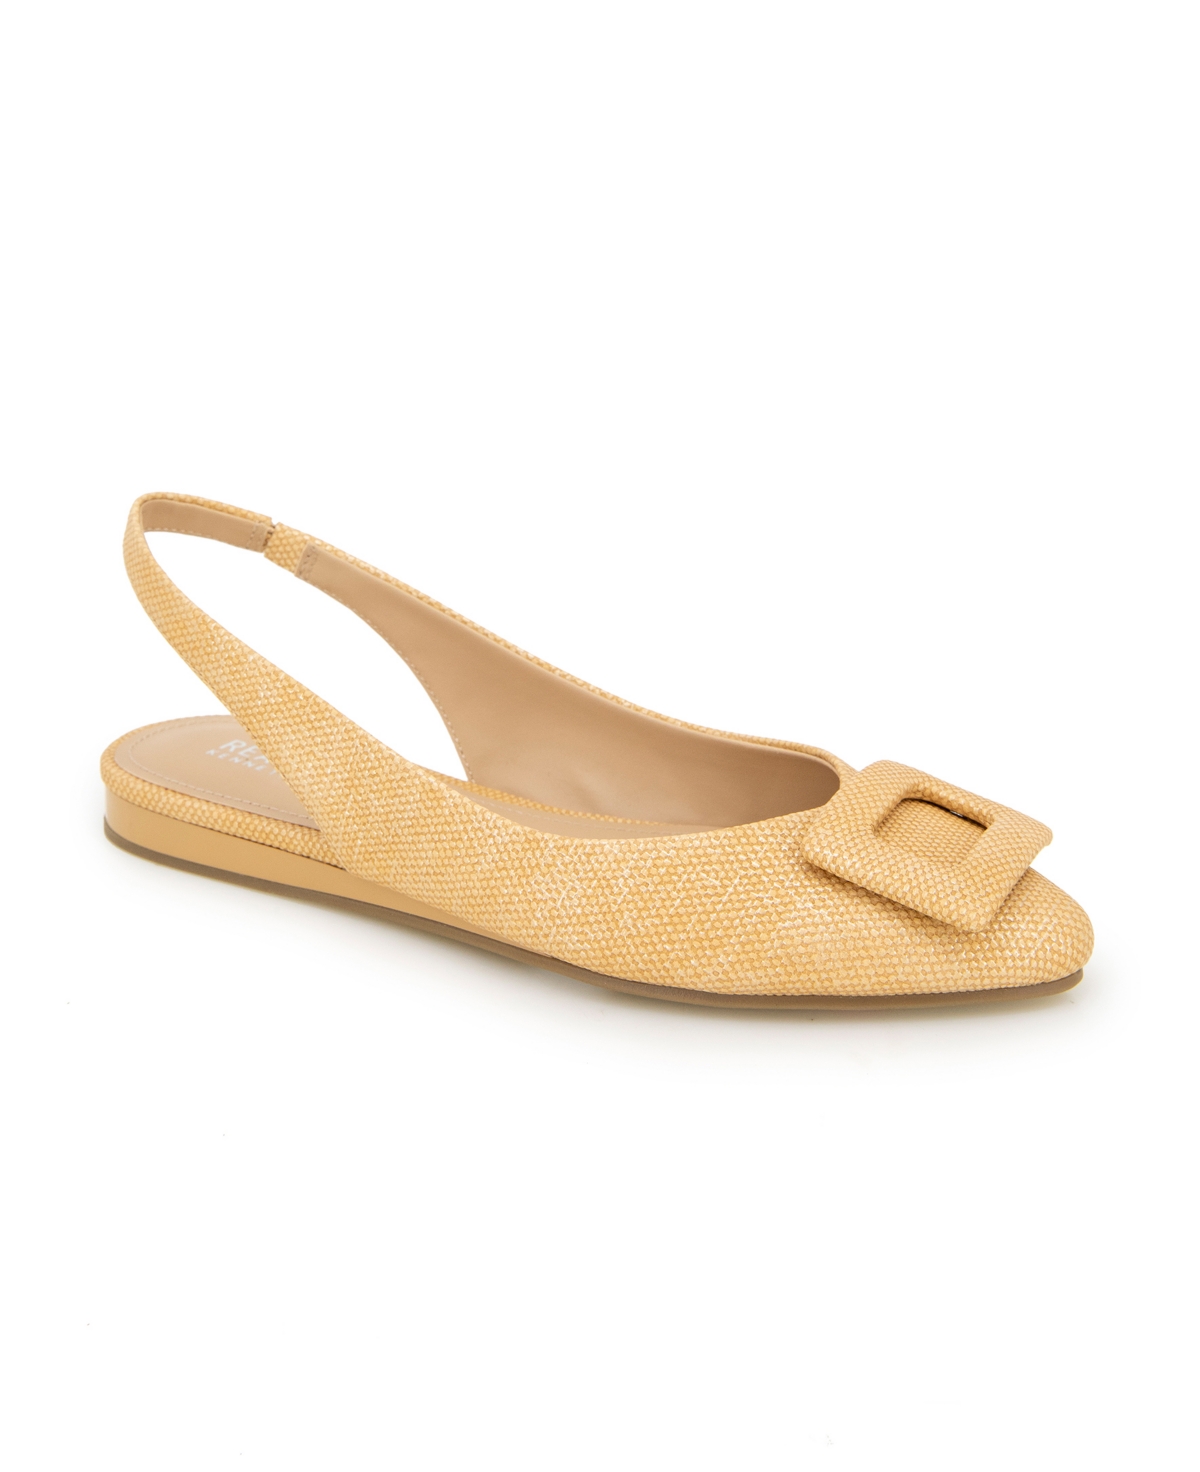 Womens's Linton Buckle Wedge Flats - Natural Weave